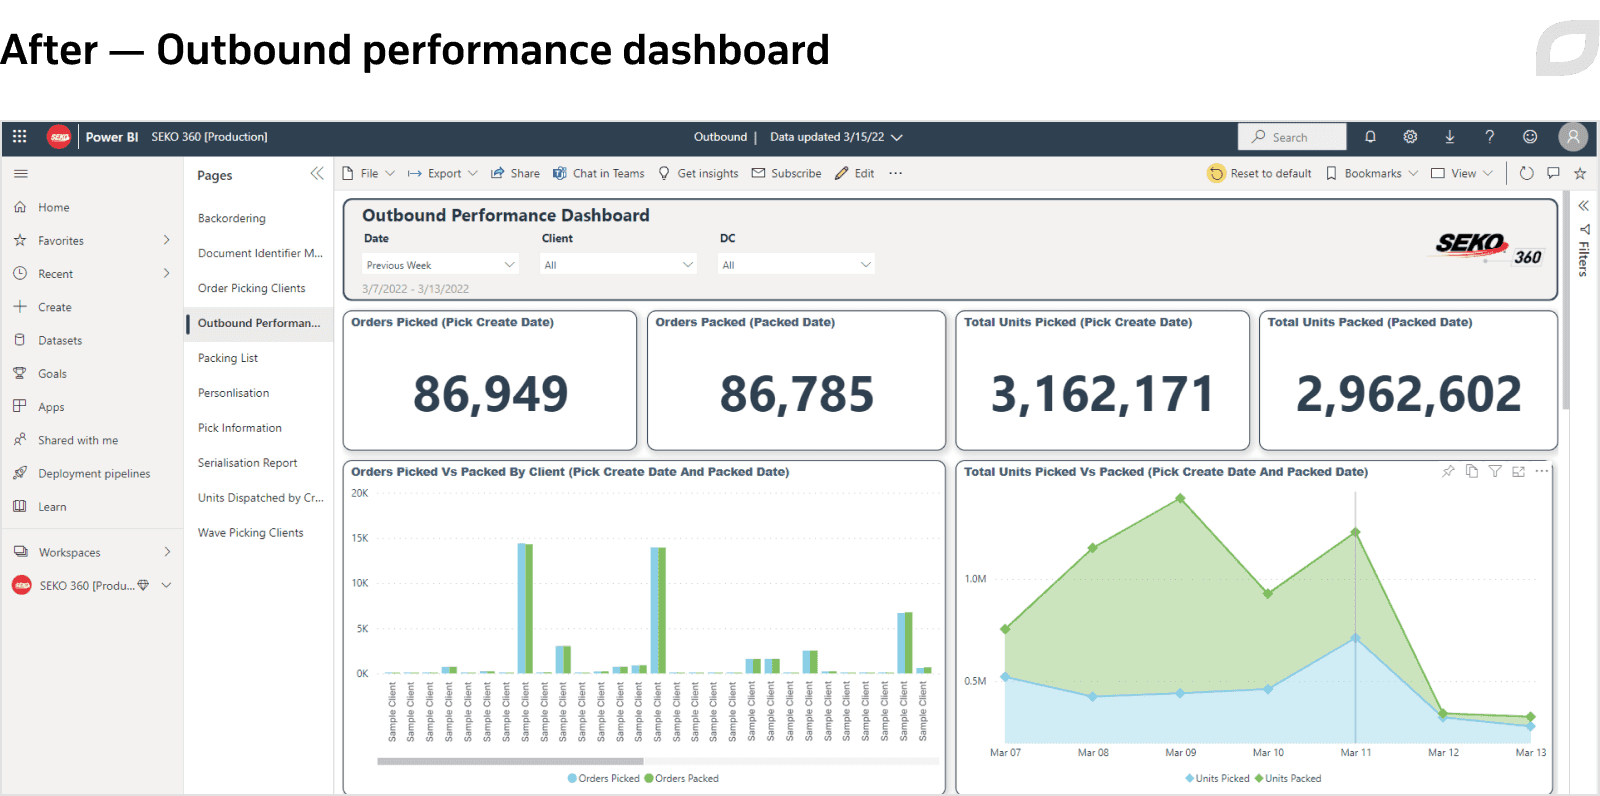 After - Outbound performance dashboard